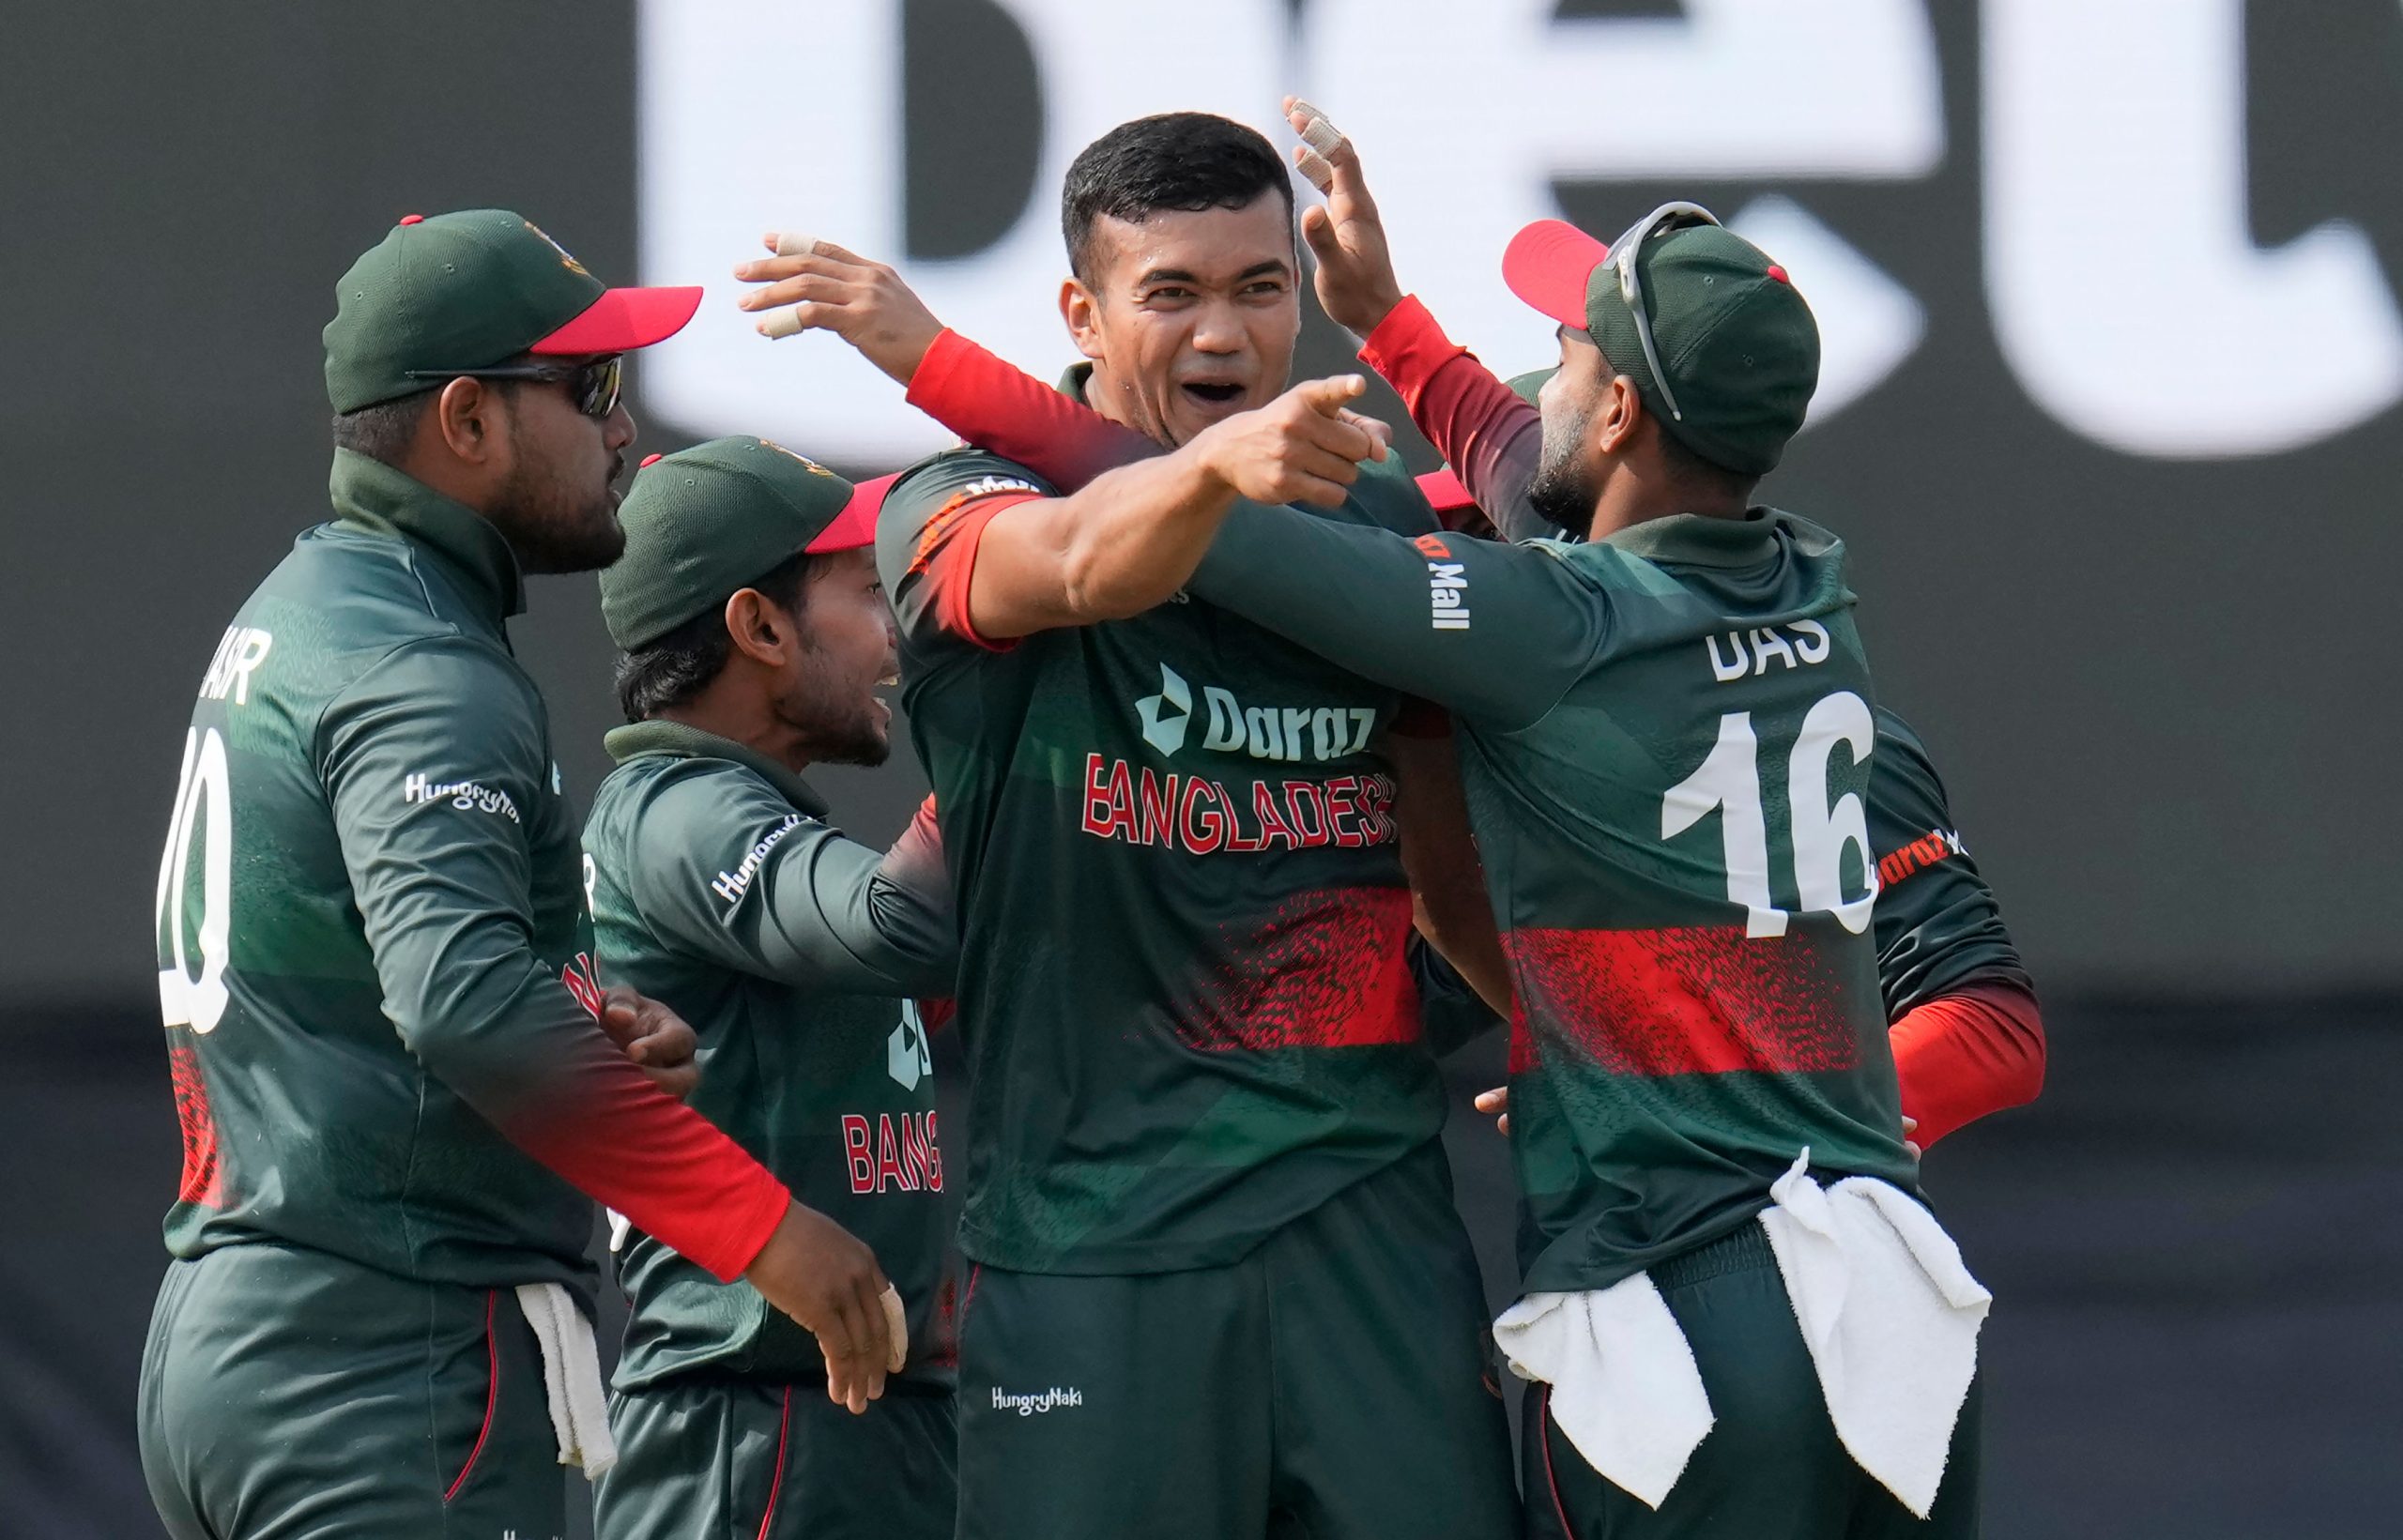 Bangladesh record history, score first ODI series win in South Africa